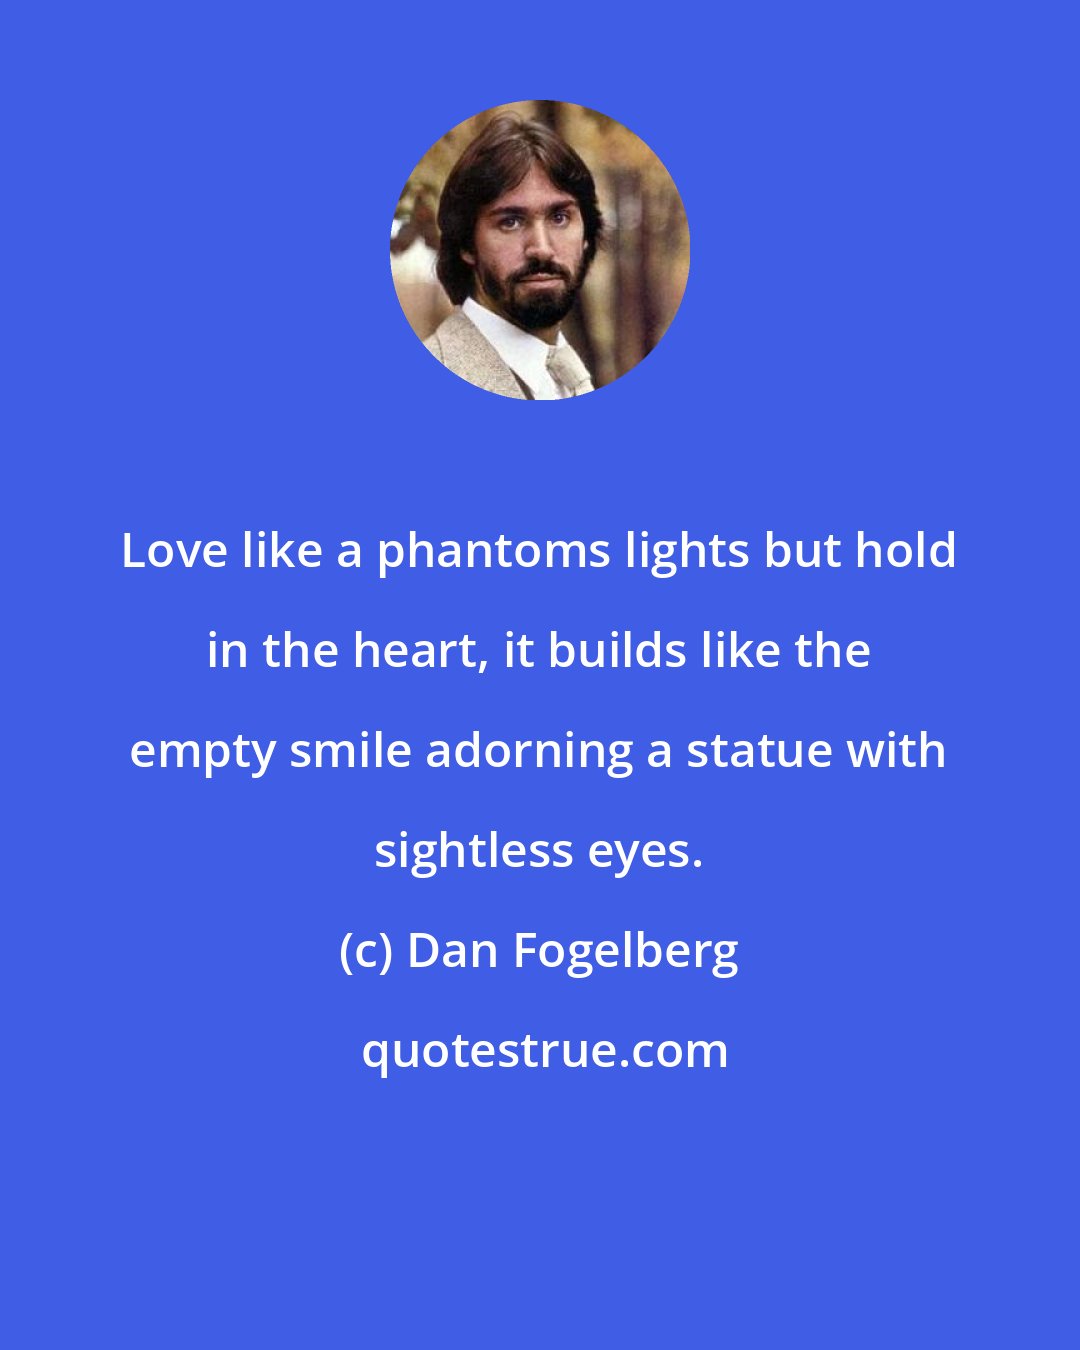 Dan Fogelberg: Love like a phantoms lights but hold in the heart, it builds like the empty smile adorning a statue with sightless eyes.